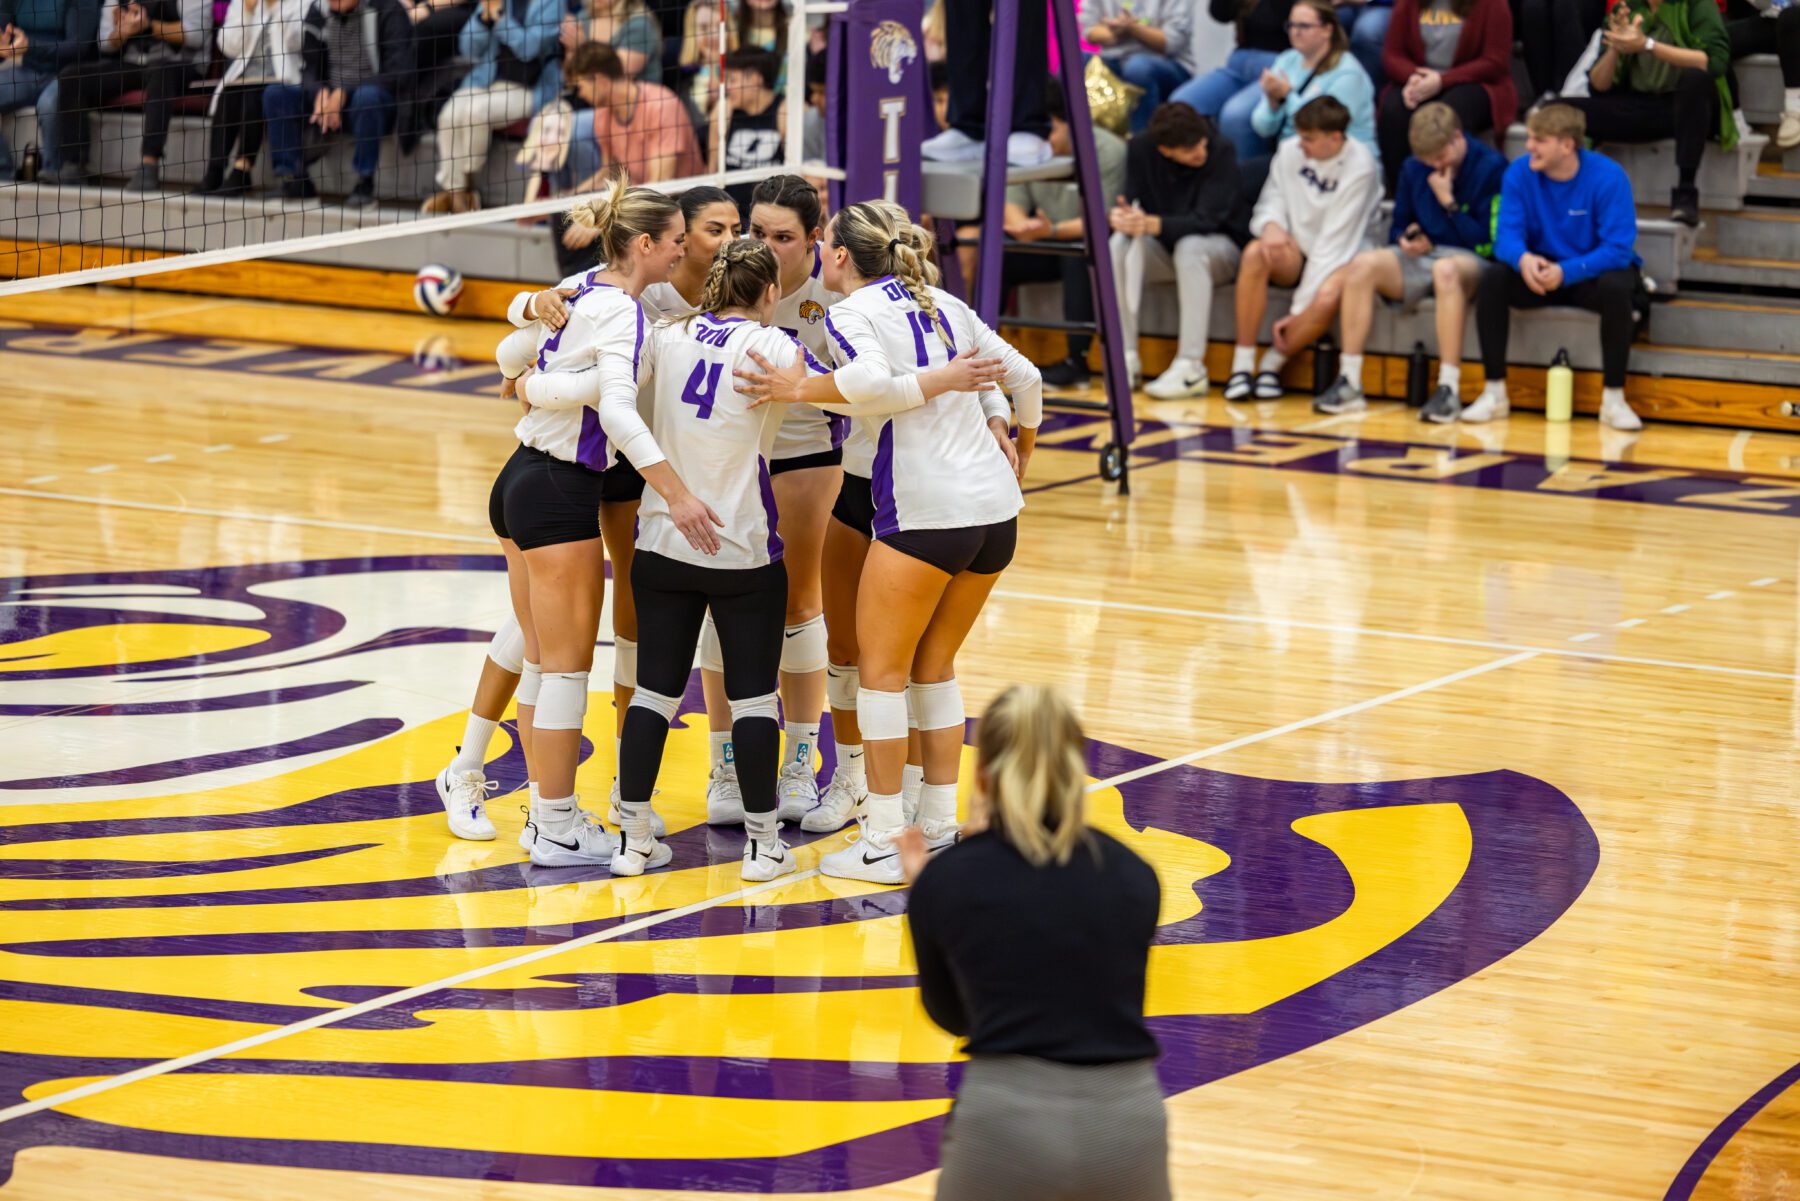 The women's volleyball team huddles up to celebrate after taking a point in the match.